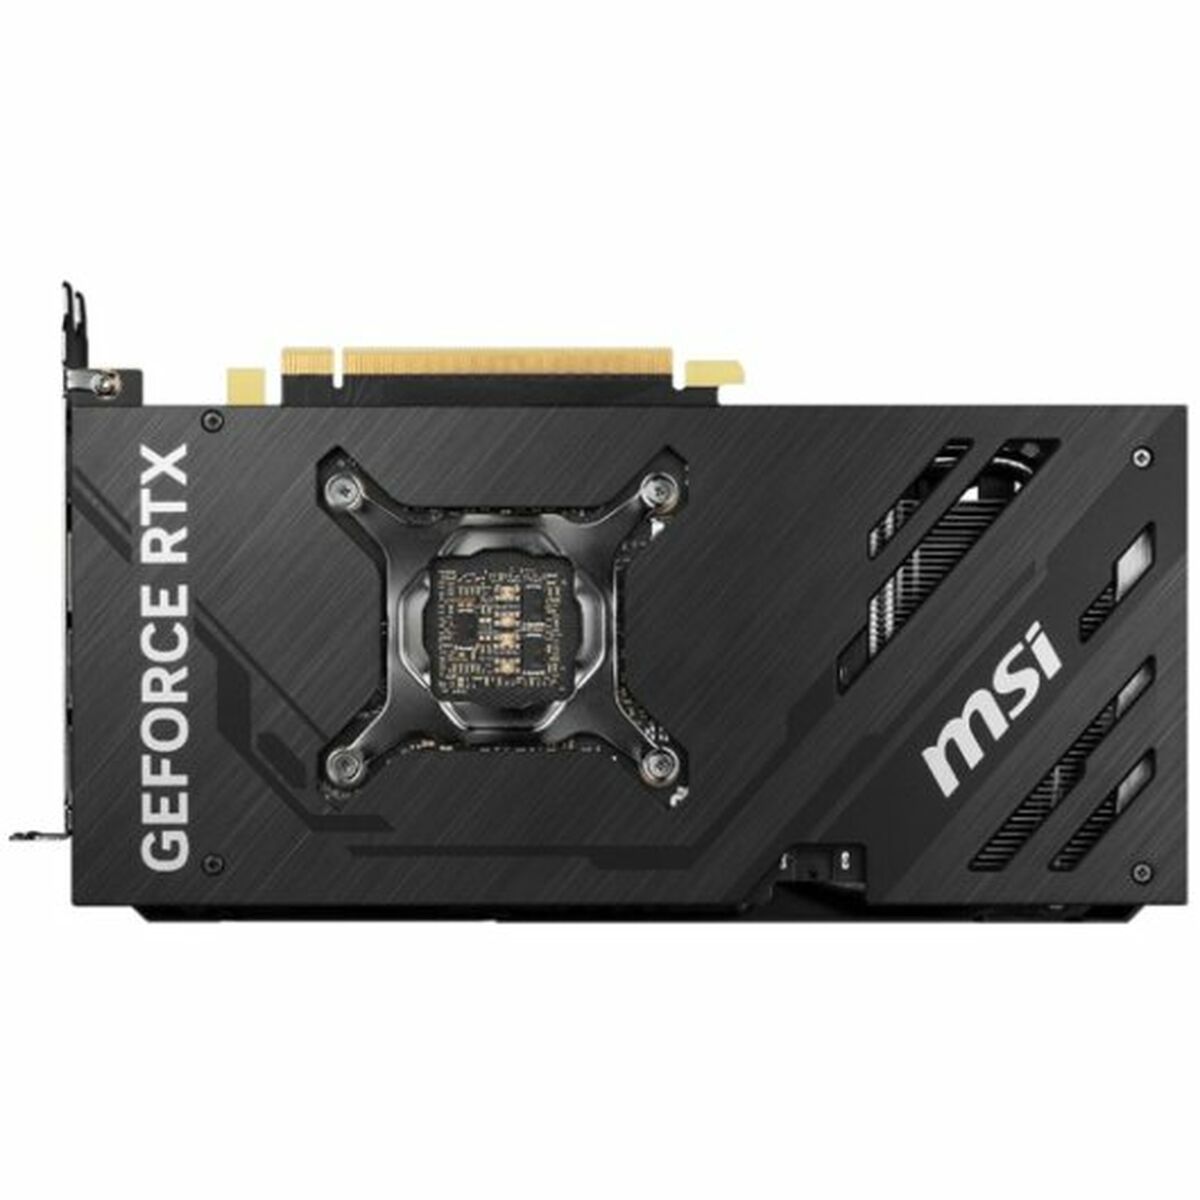 Graphics card MSI GEFORCE RTX 4070 SUPER GEFORCE RTX 4070 12 GB GDDR6X, MSI, Computing, Components, graphics-card-msi-geforce-rtx-4070-super-geforce-rtx-4070-12-gb-gddr6x, Brand_MSI, category-reference-2609, category-reference-2803, category-reference-2812, category-reference-t-19685, category-reference-t-19912, category-reference-t-21360, category-reference-t-25665, computers / components, Condition_NEW, Price_700 - 800, Teleworking, RiotNook